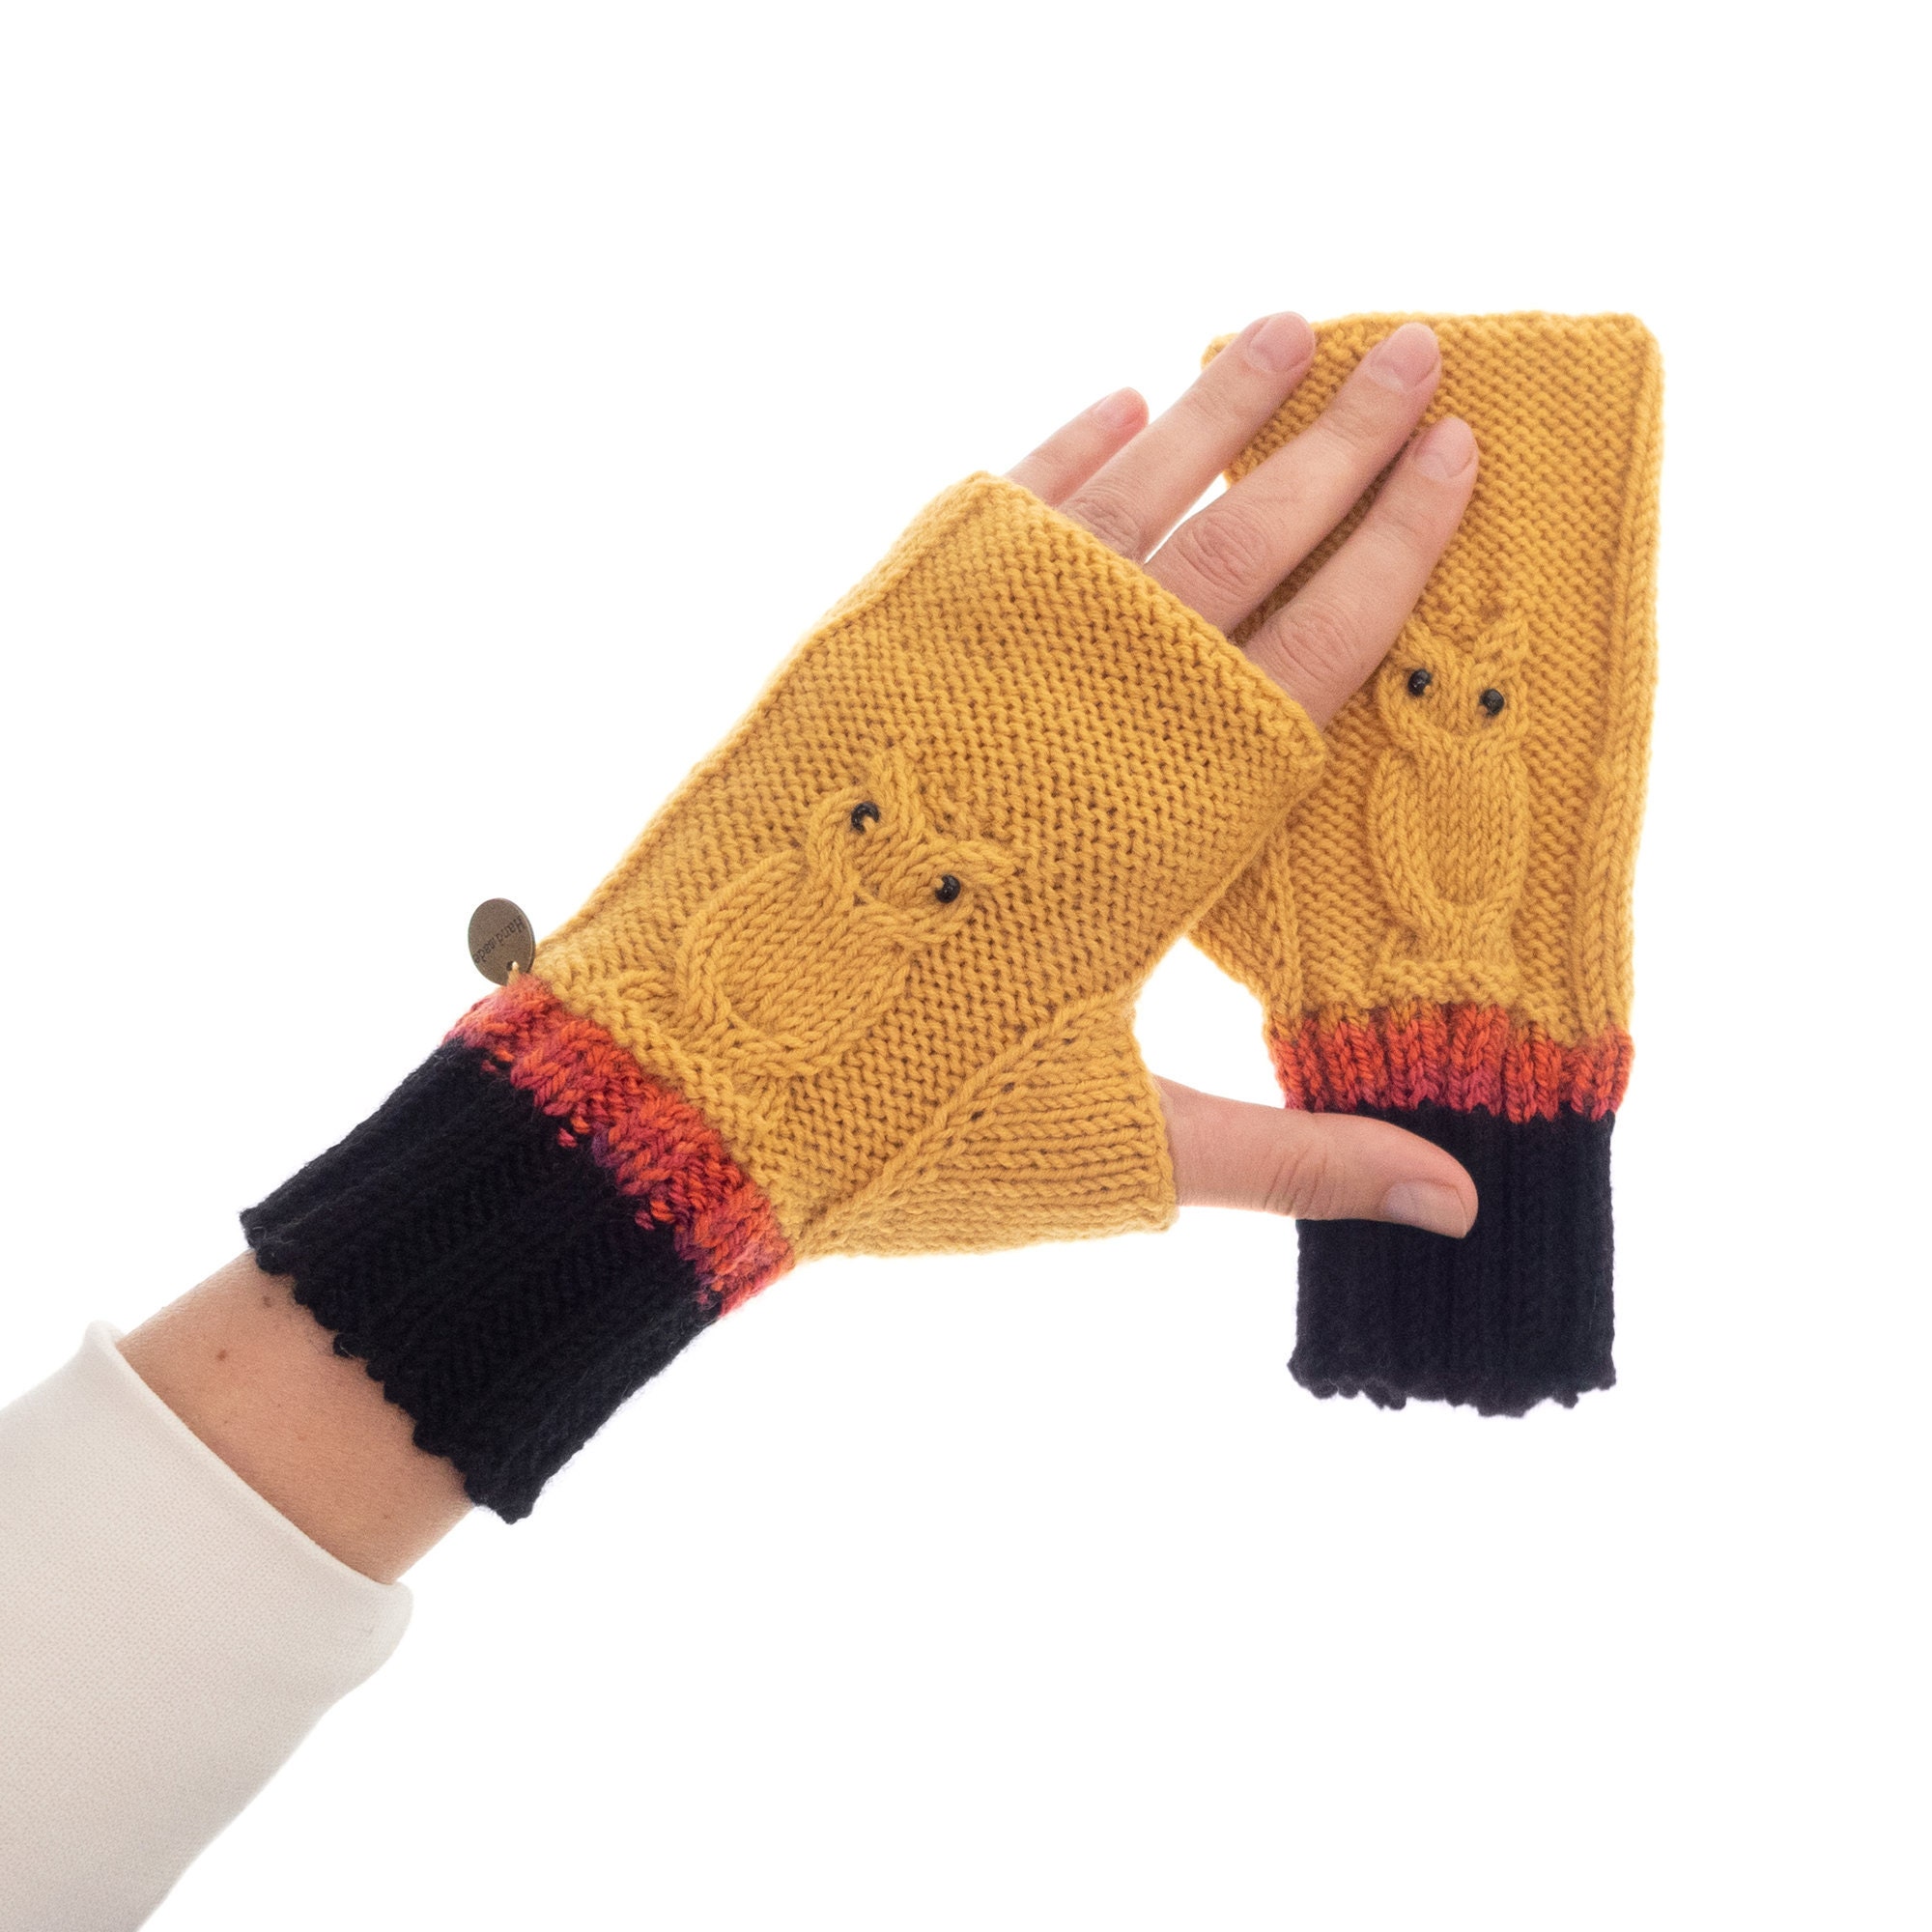 yellow fingerless gloves with owls